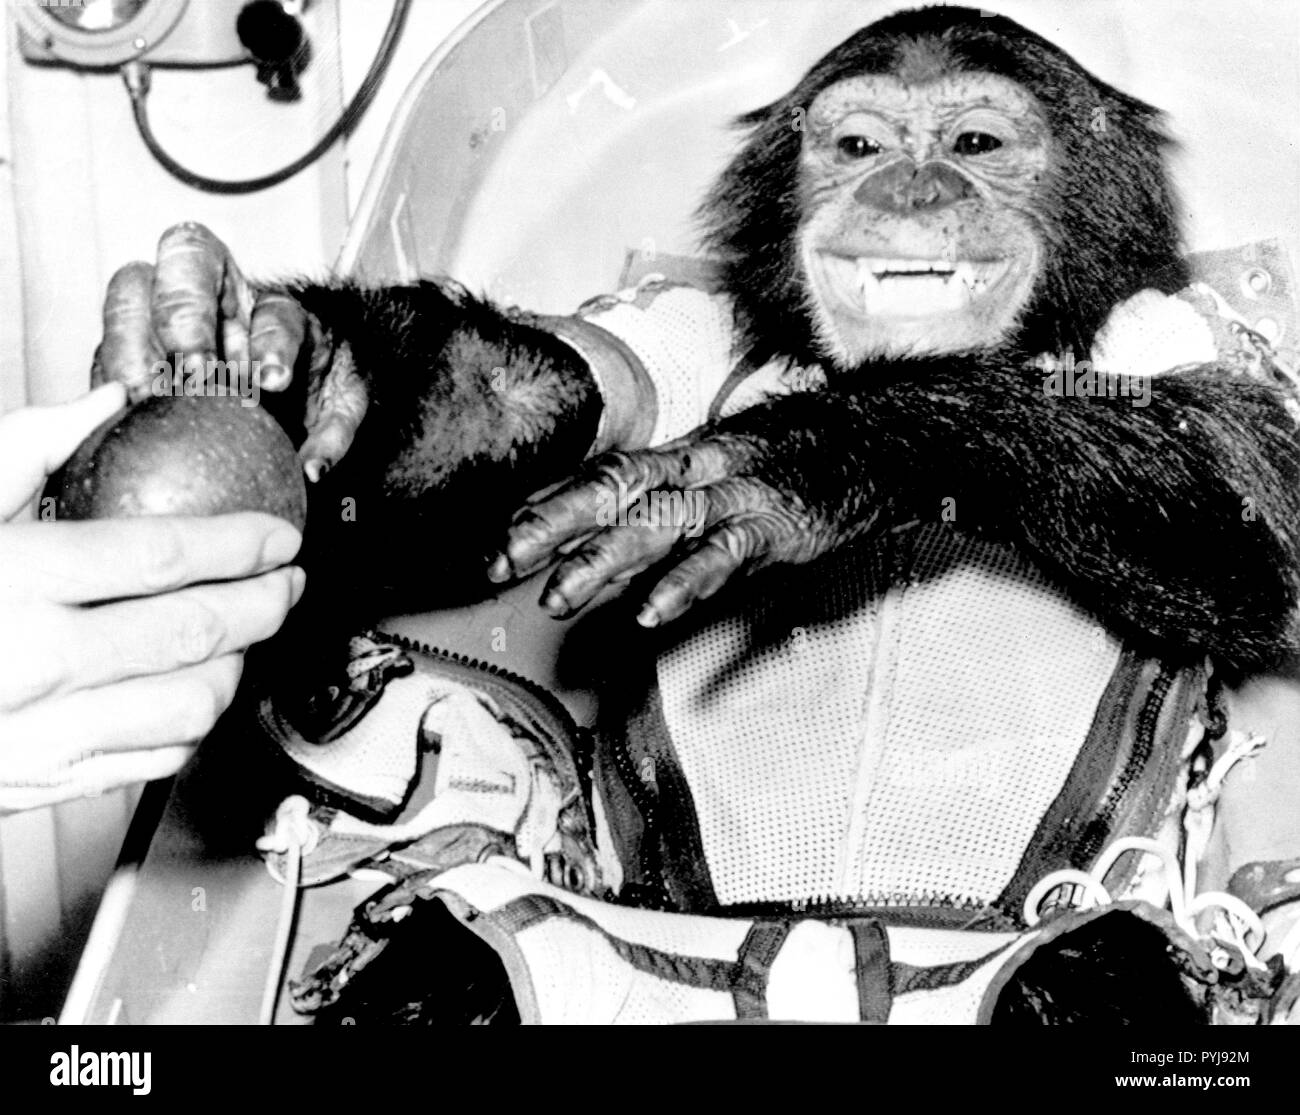 (31 Jan. 1961) --- Closeup view of the chimpanzee 'Ham', the live test subject for the Mercury-Redstone 2 (MR-2) test flight, following his successful recovery from the Atlantic. Stock Photo